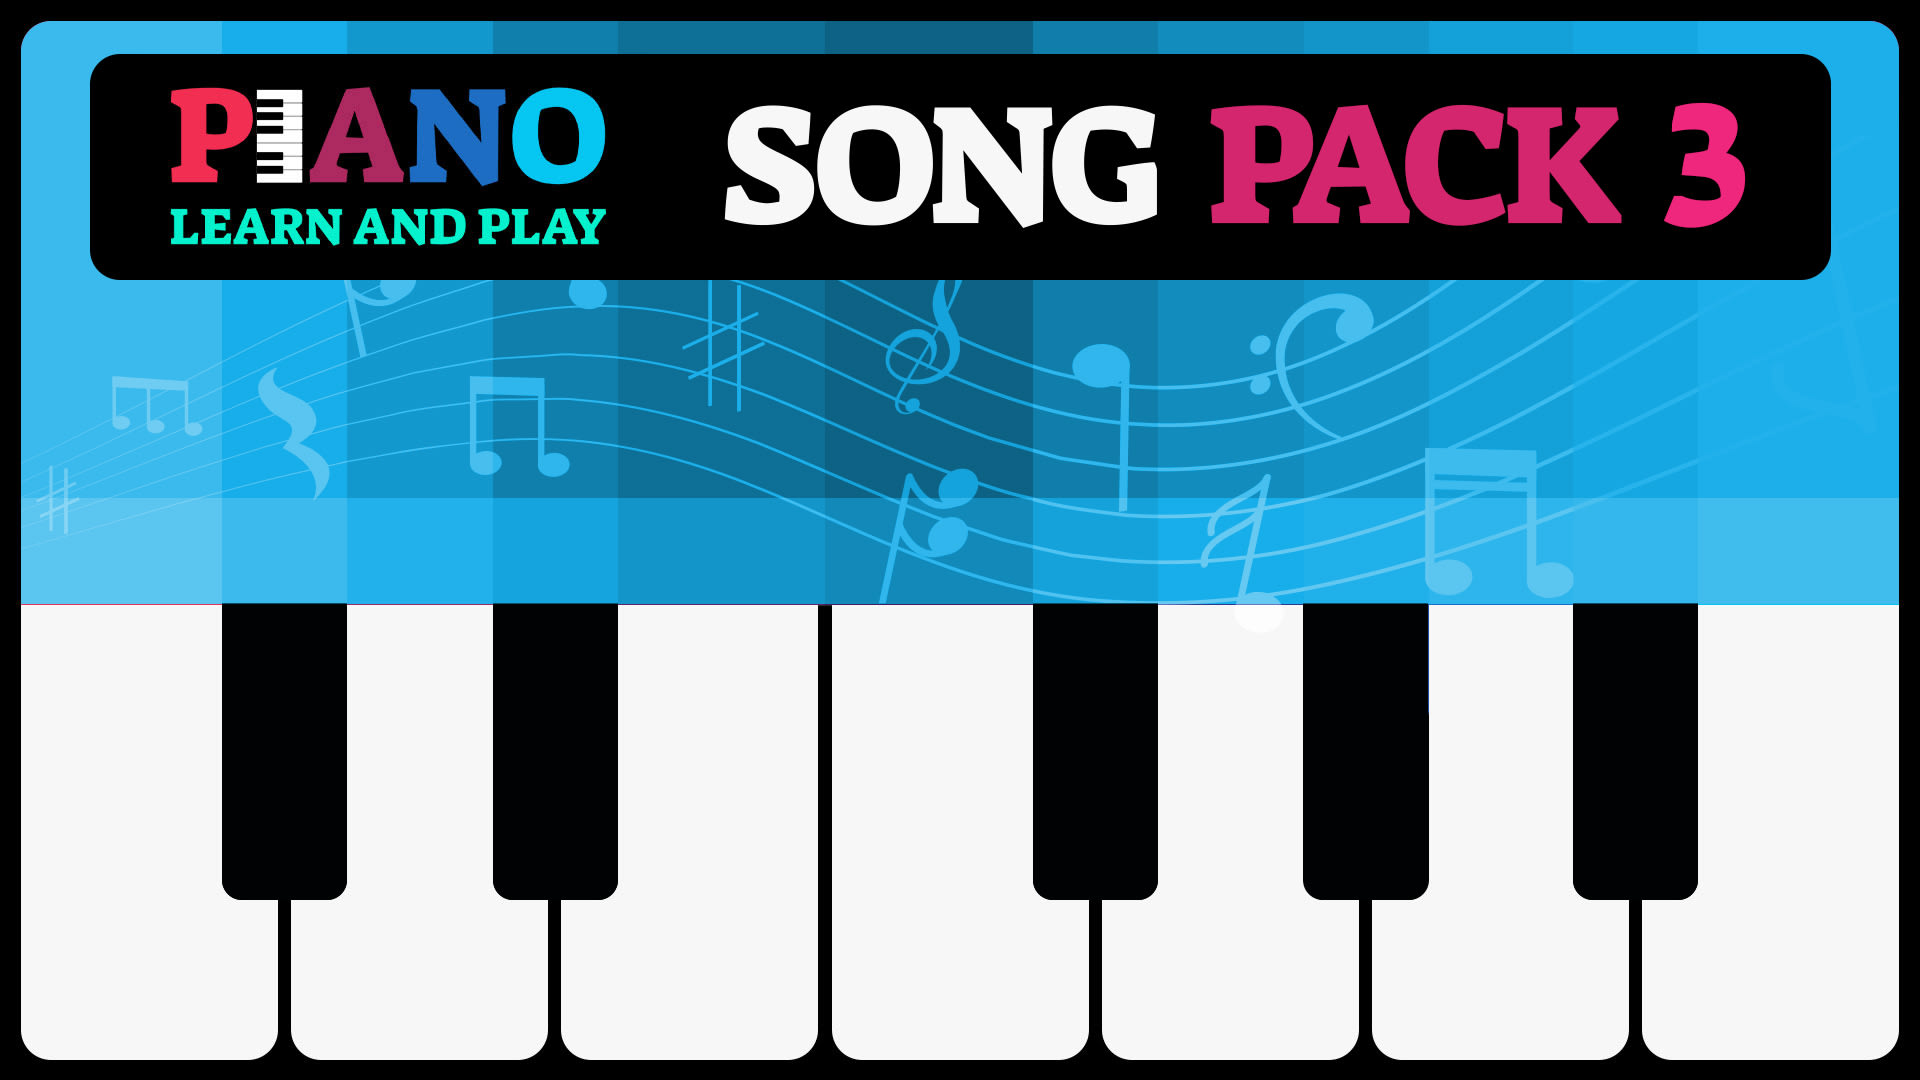 Song Pack 3